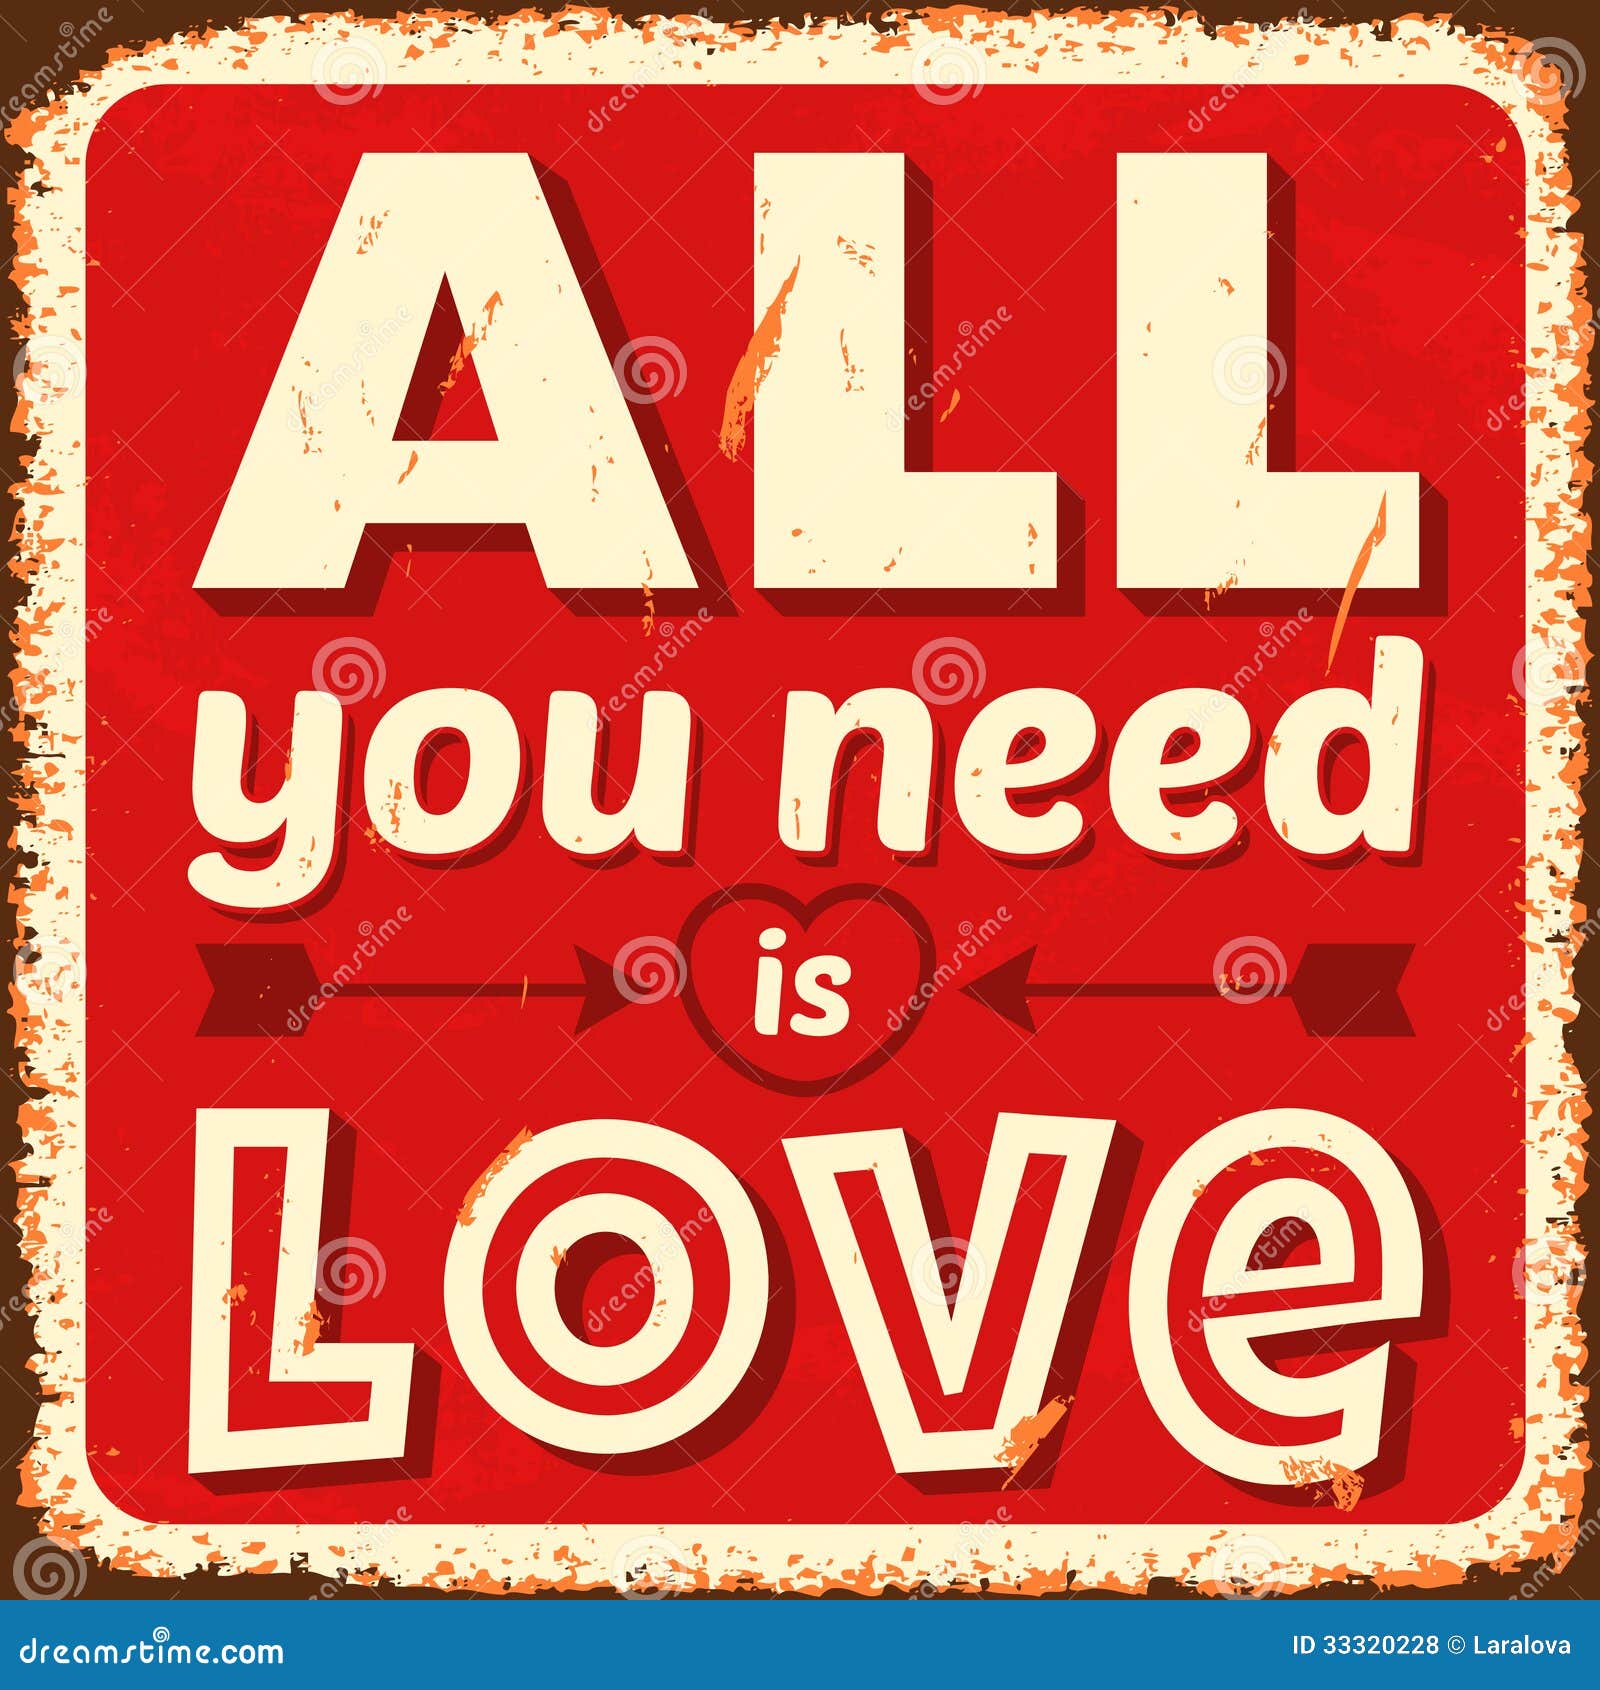 Love Is All You Need - Beatles - YouTube